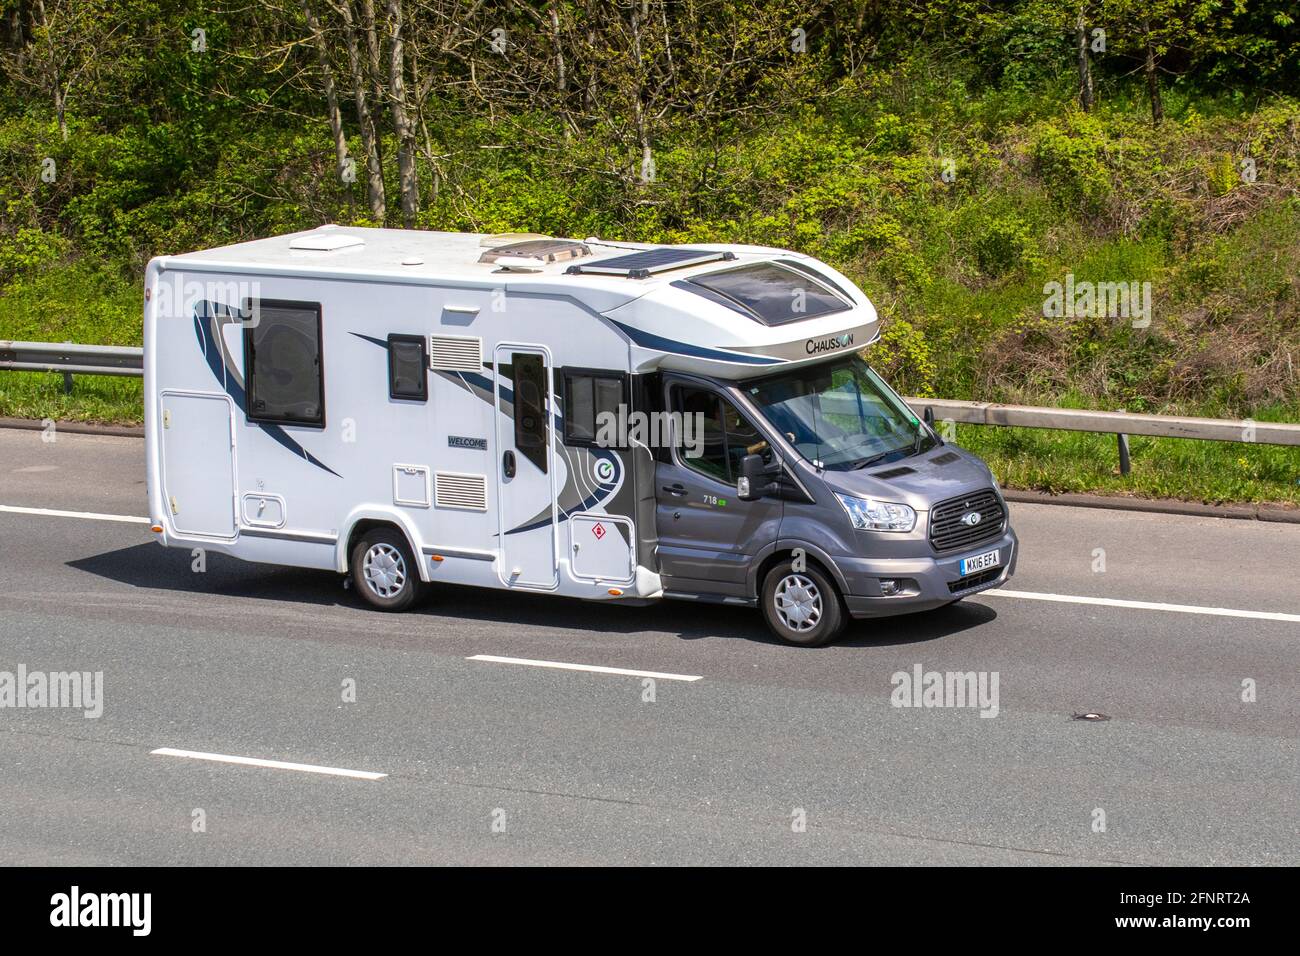 Chausson Welcome 718 EB striking graphics, large windows, low profile cab  motor-homes; Caravans and Motorhomes, campervans on Britain's roads, RV  leisure vehicle, family holidays, caravanette vacations, Touring caravan  holiday, van conversions, Vanagon